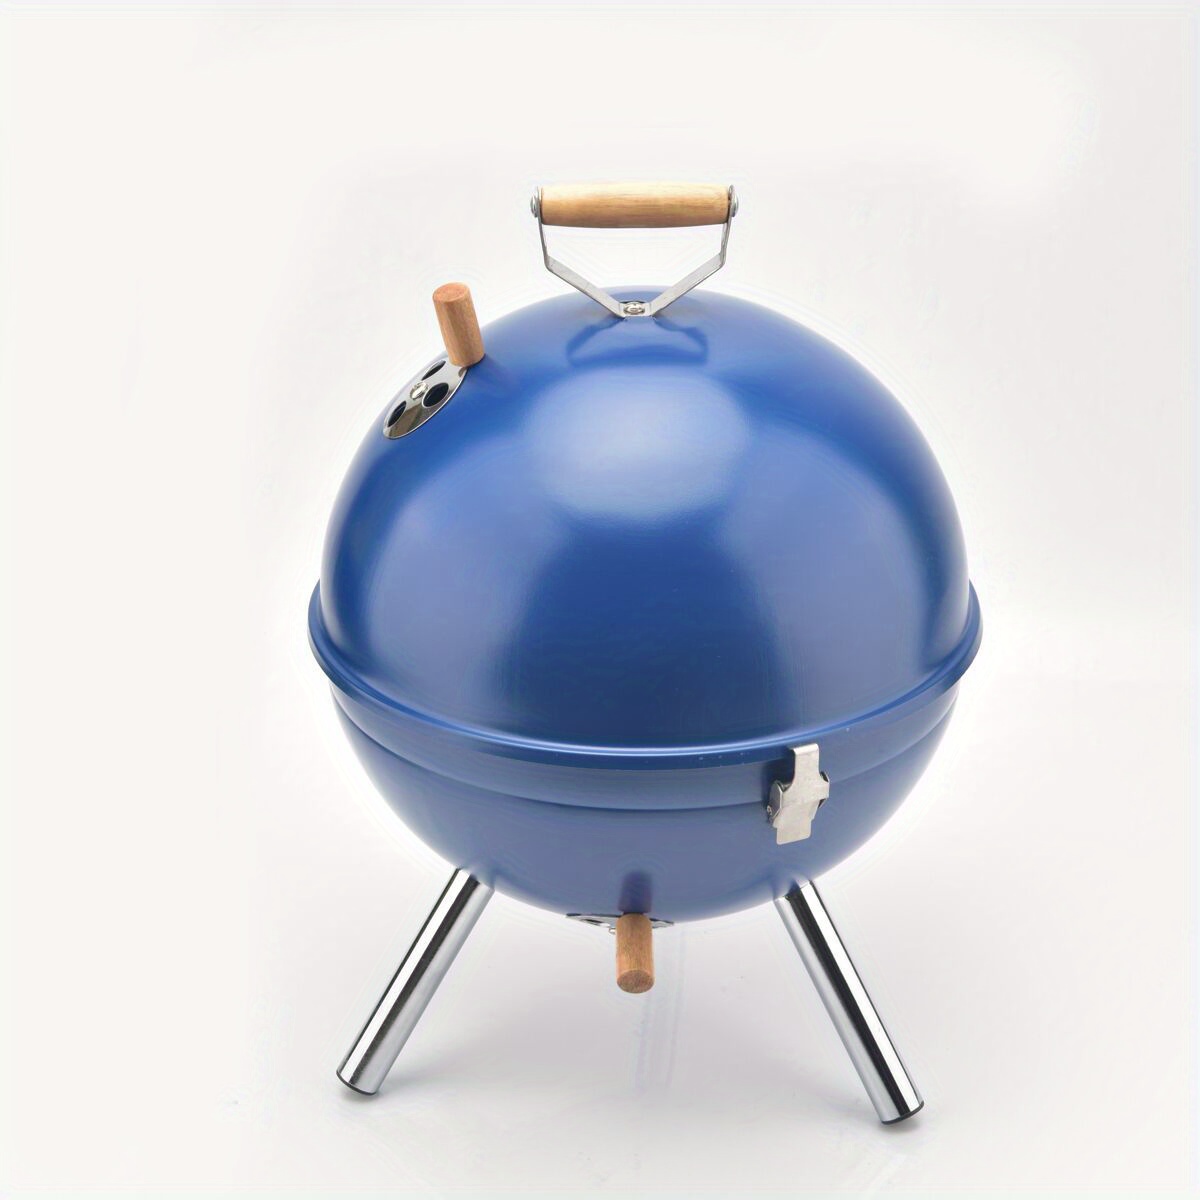 Portable Iron BBQ Grill Stove: Enjoy Delicious Barbecue Anywhere with This Outdoor Camping Charcoal Stove!